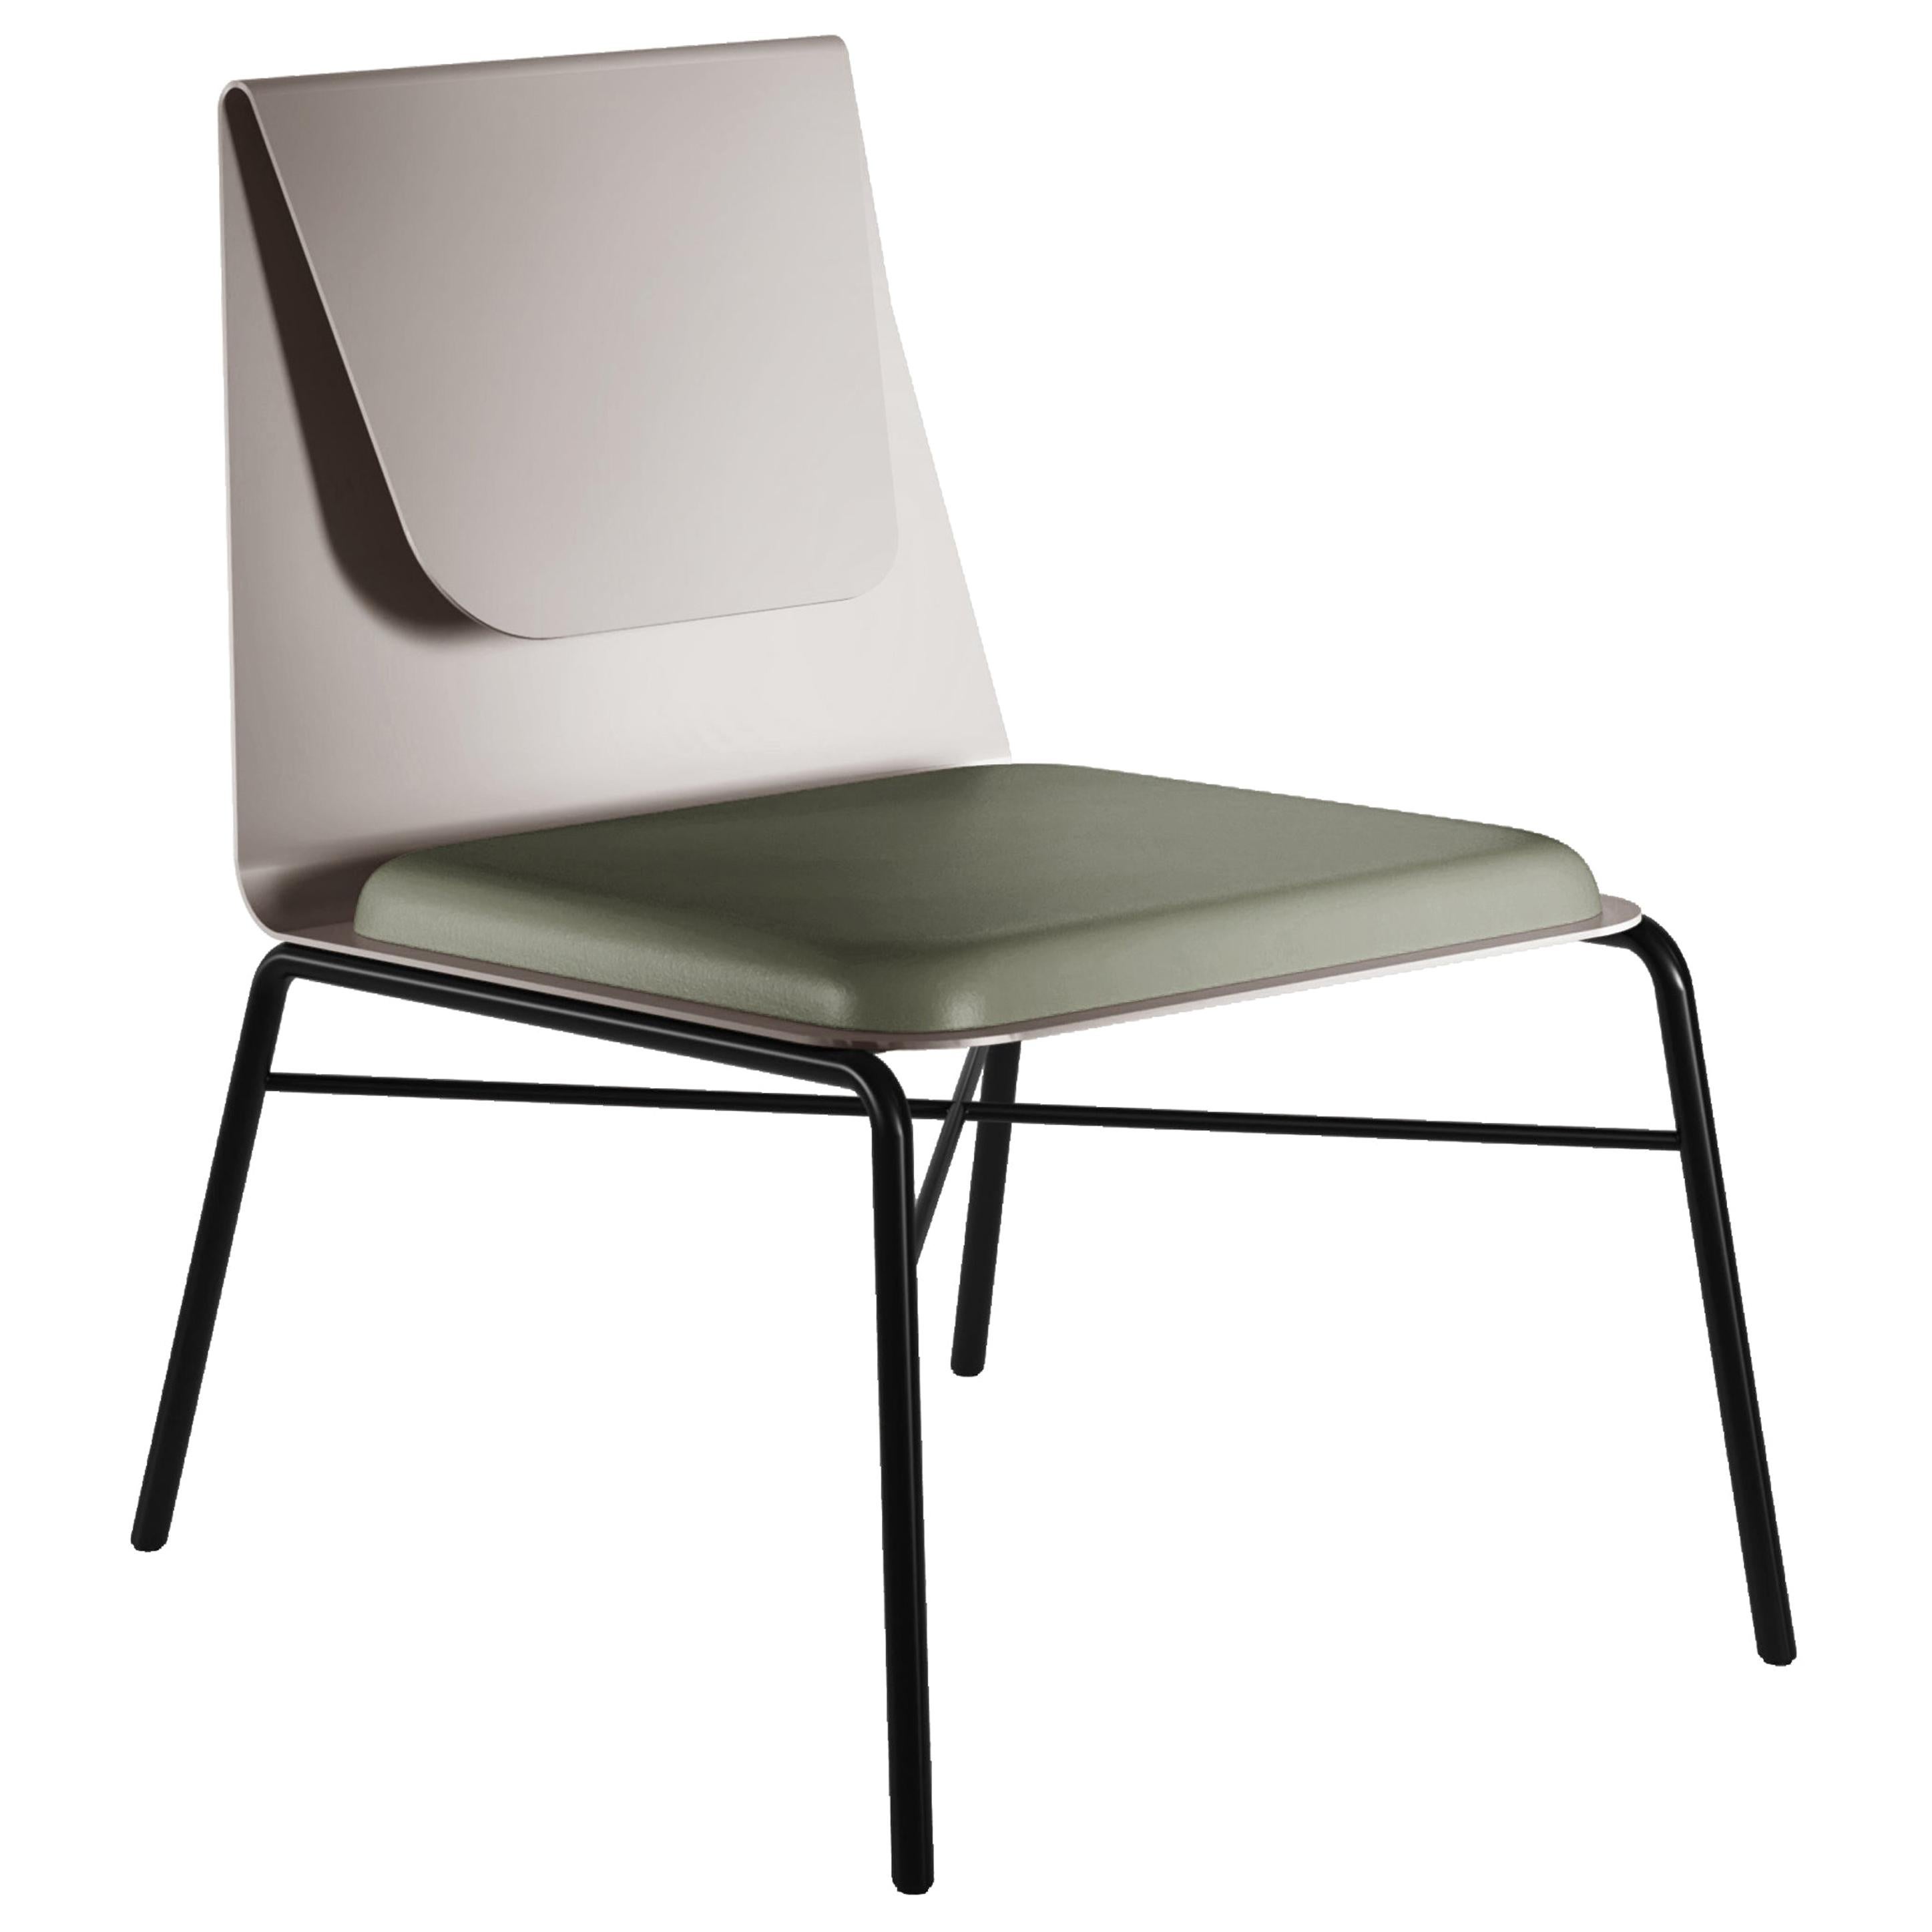 Fold Contemporary Lounge Chair in Metal and Fabric by Artefatto Design Studio